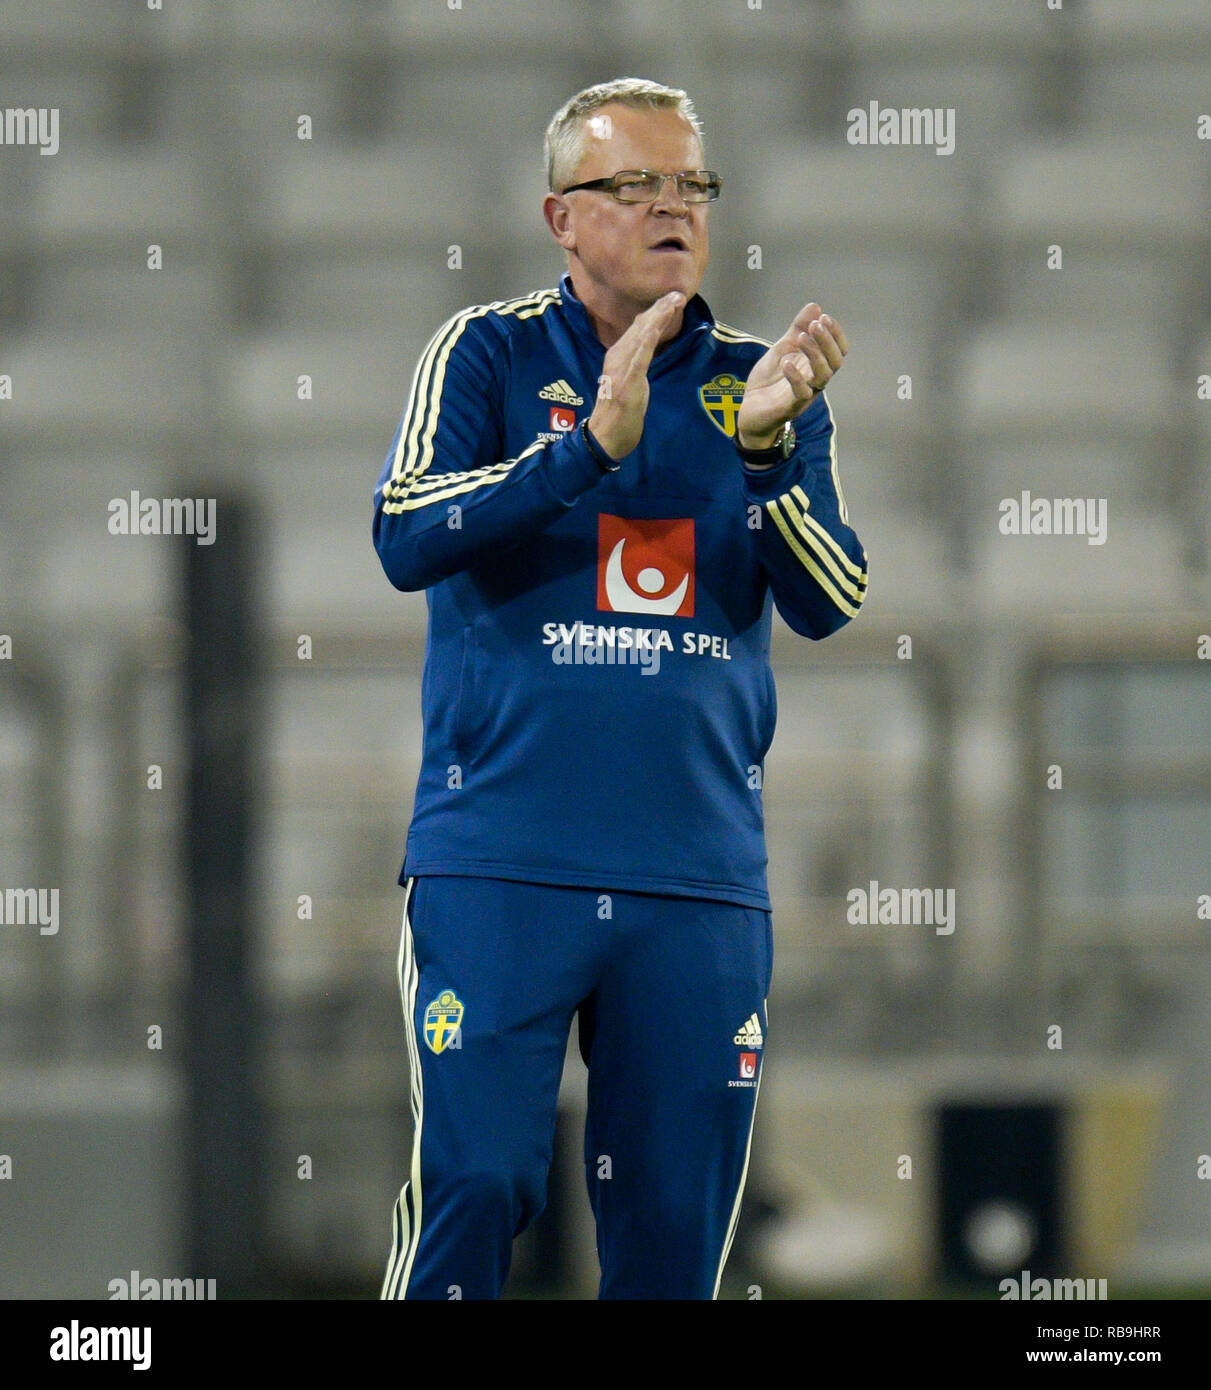 Doha, Qatar. 8th Jan, 2019. Sweden's head coach Janne Andersson reacts during the international friendly soccer match between Finland and Sweden in Doha, capital of Qatar, Jan. 8, 2019. Finland won 1-0. Credit: Nikku/Xinhua/Alamy Live News Stock Photo